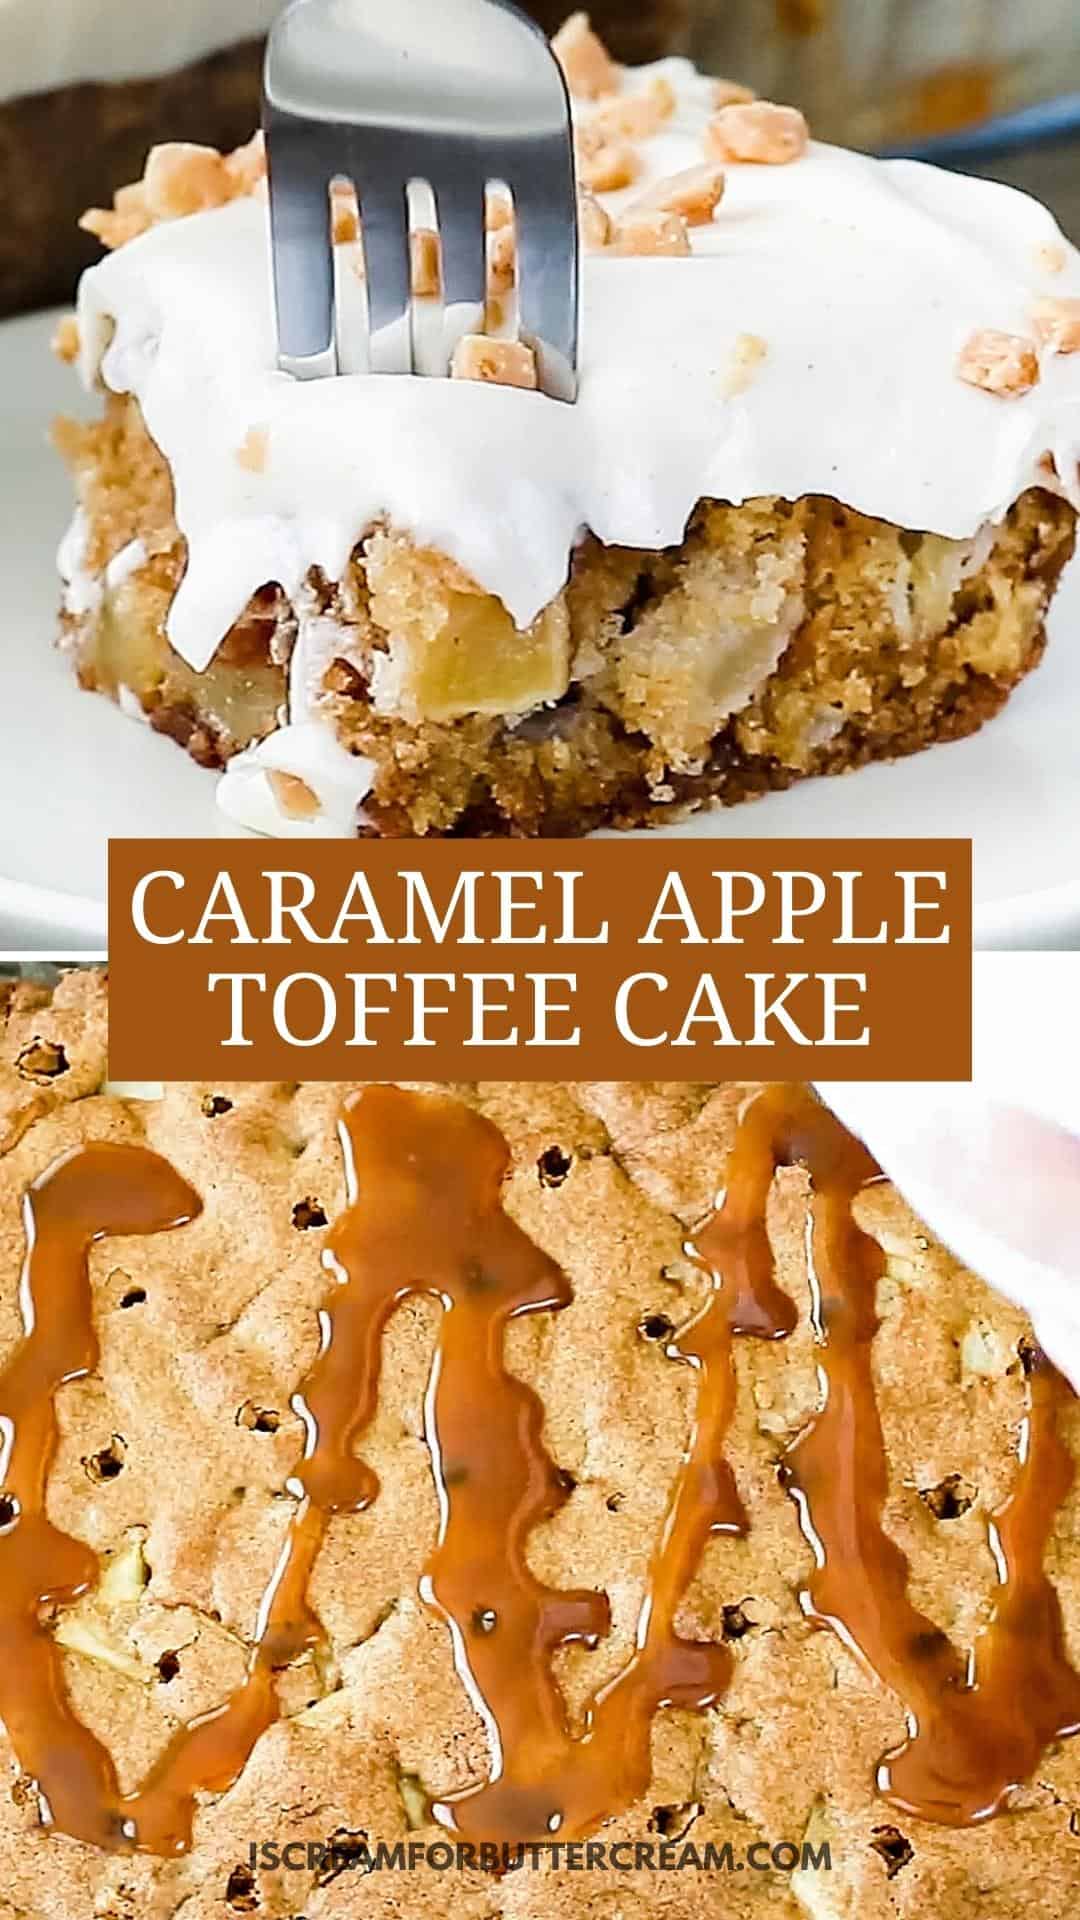 Piece of cake and caramel drizzle on cake with text.